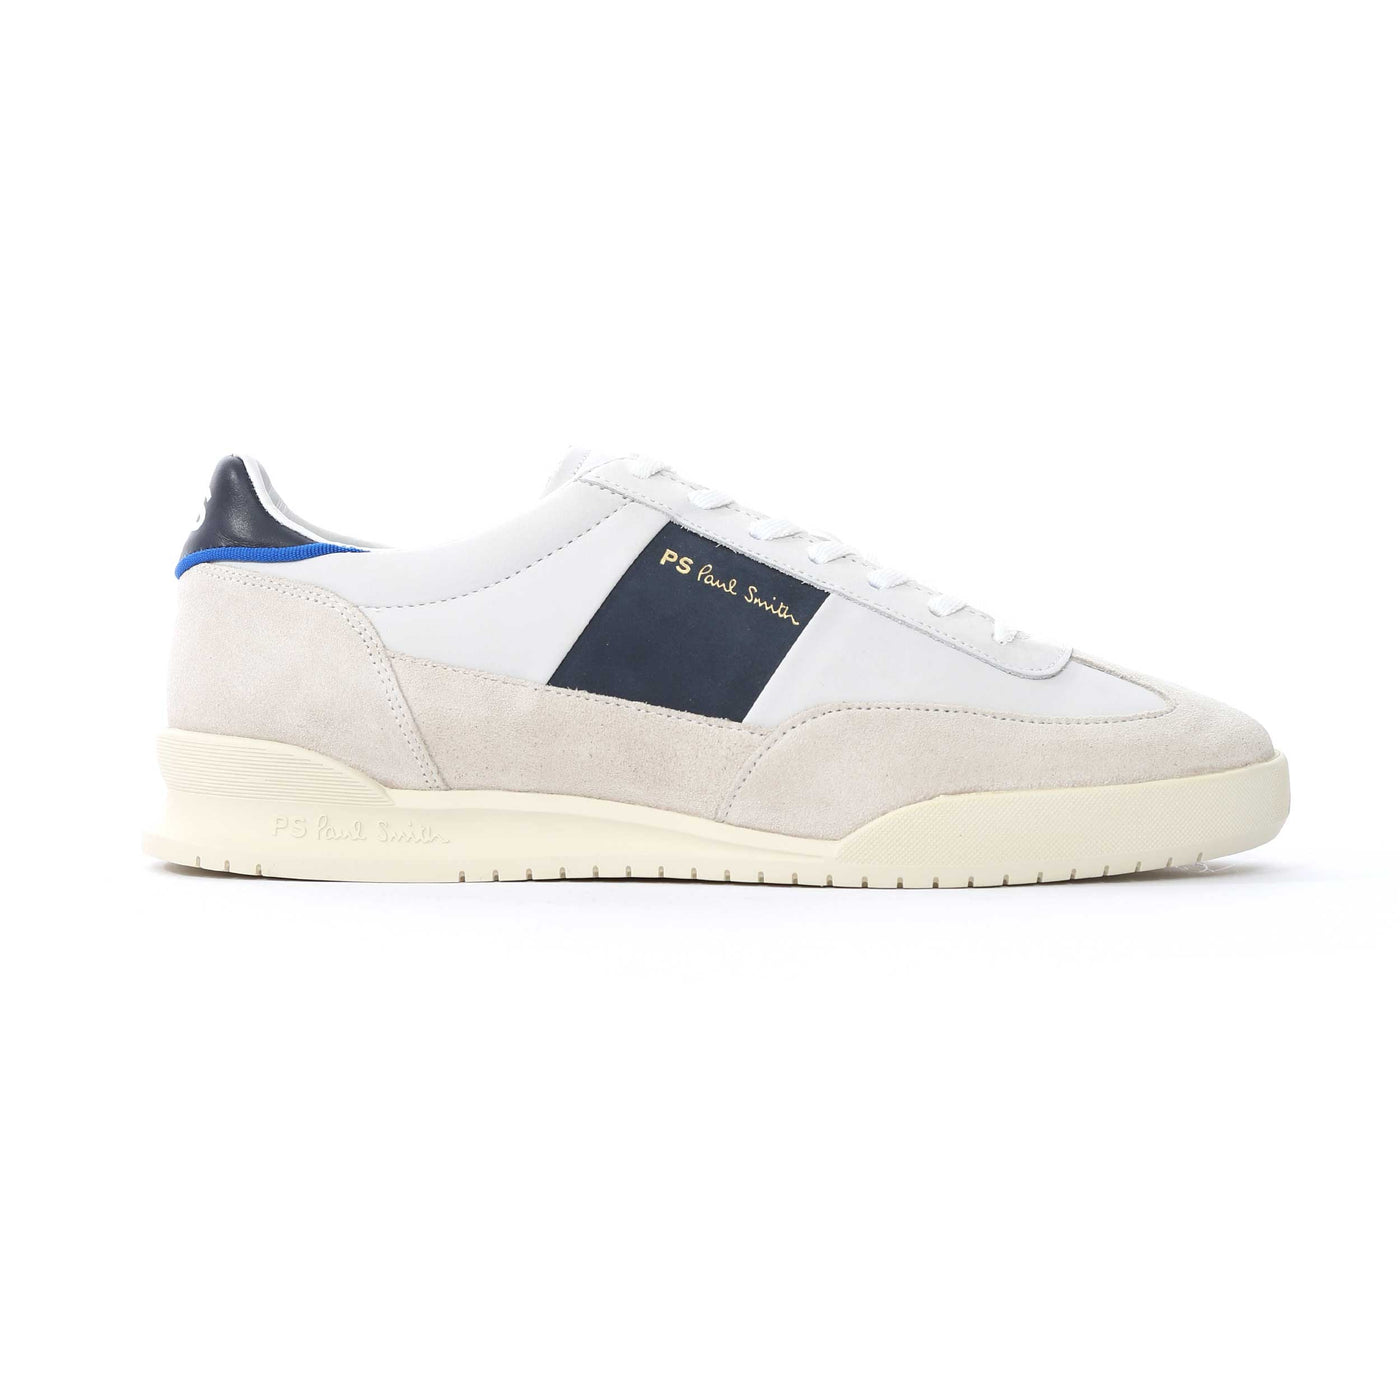 Paul Smith Dover Trainer in White